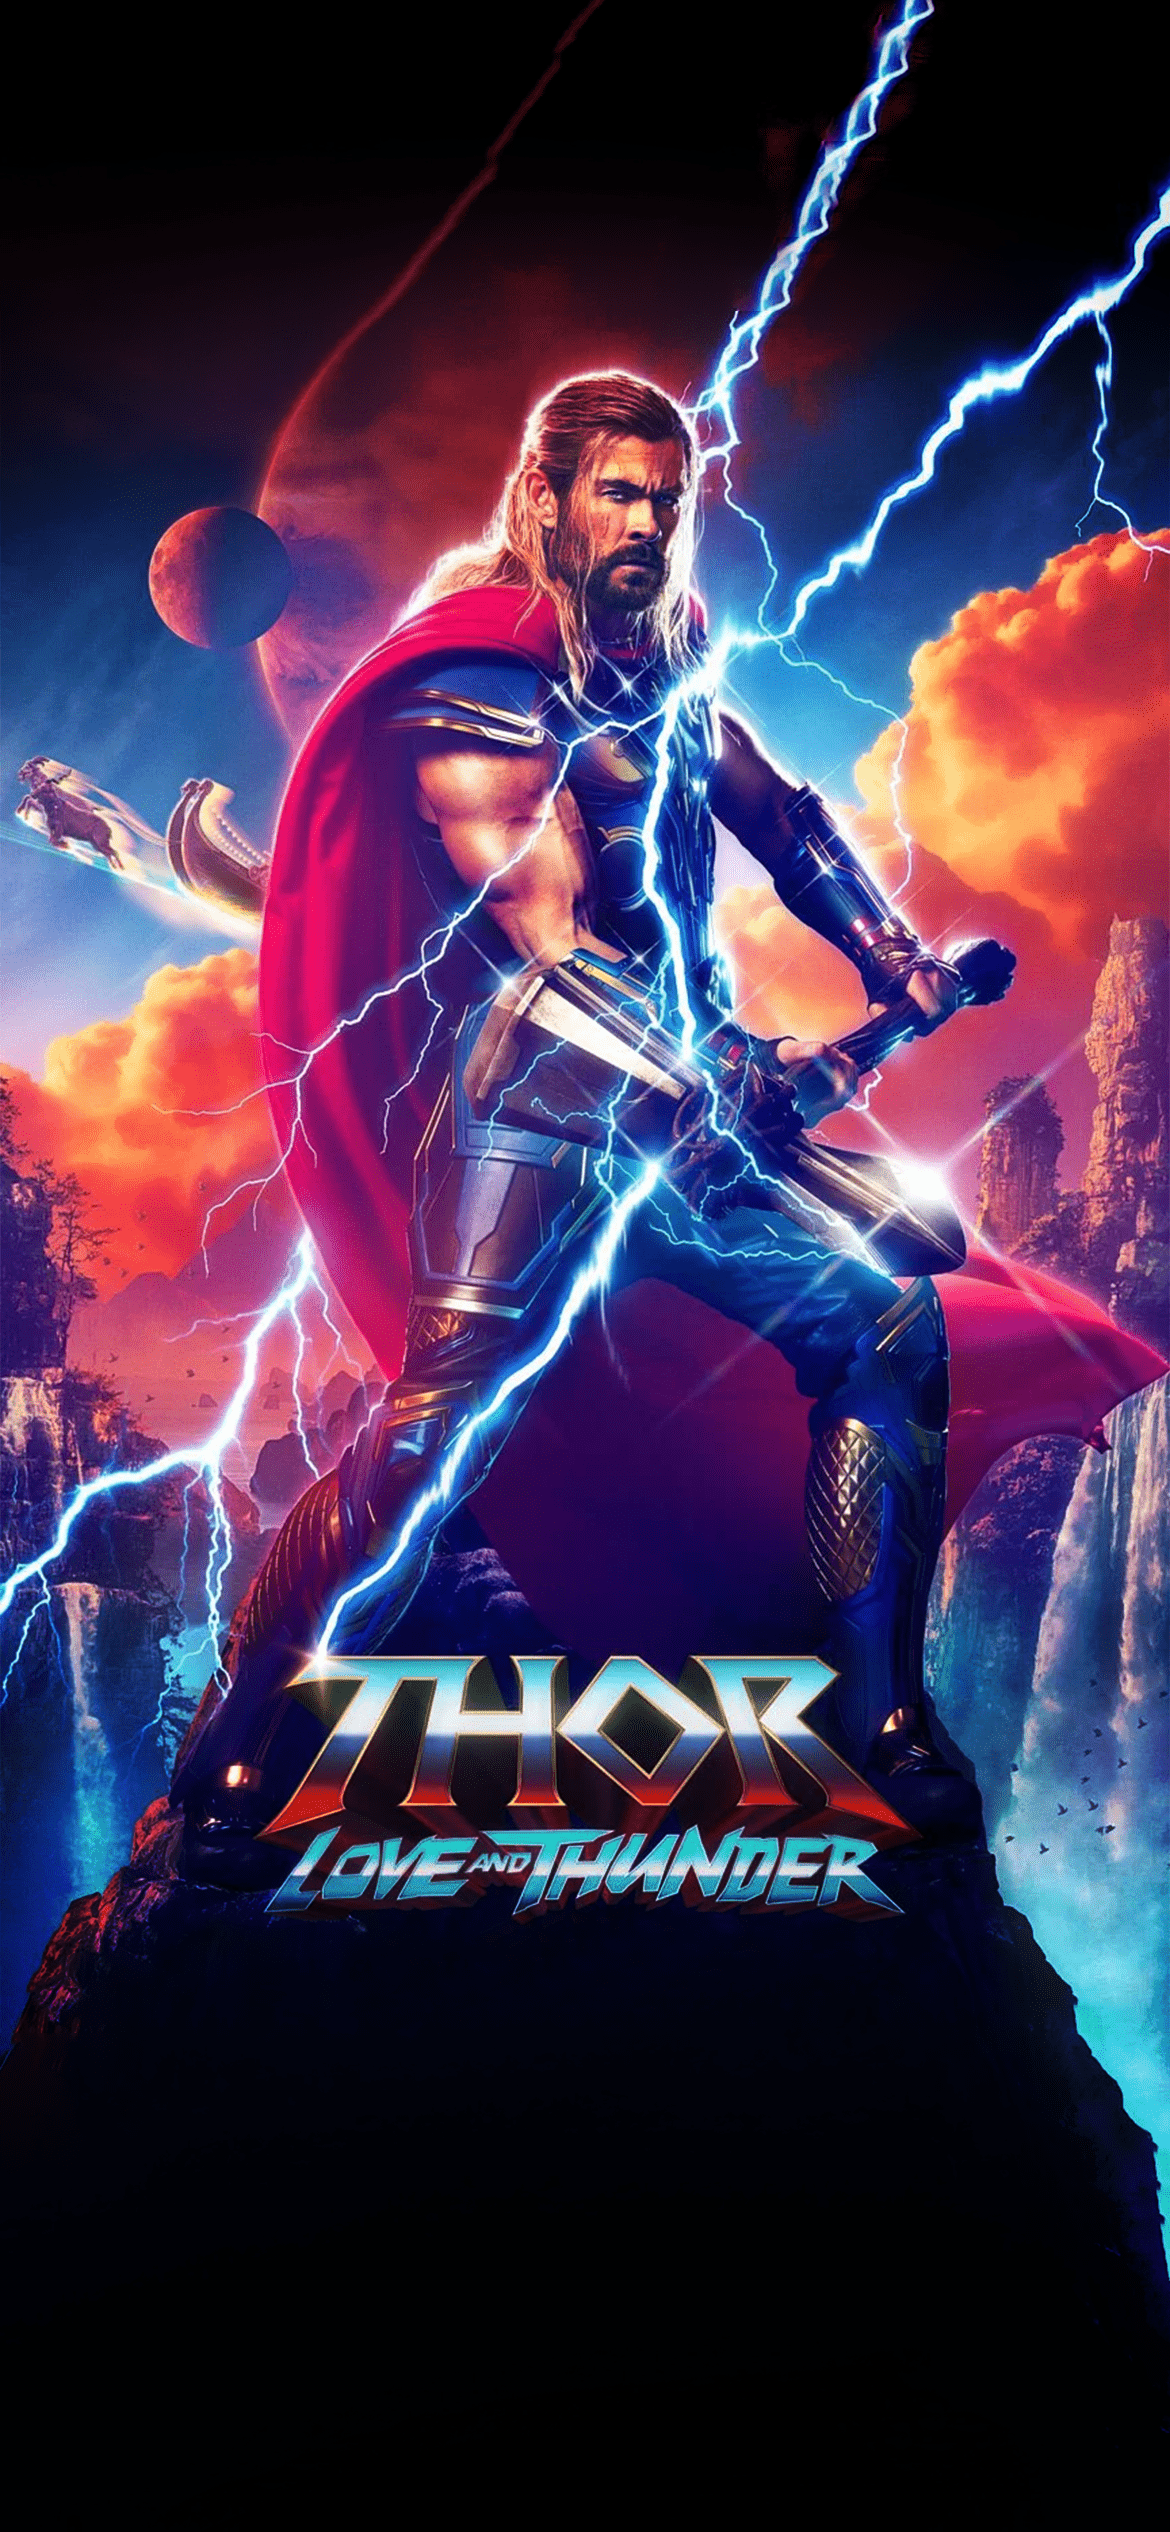 Thor: Love and Thunder Wallpaper for phone